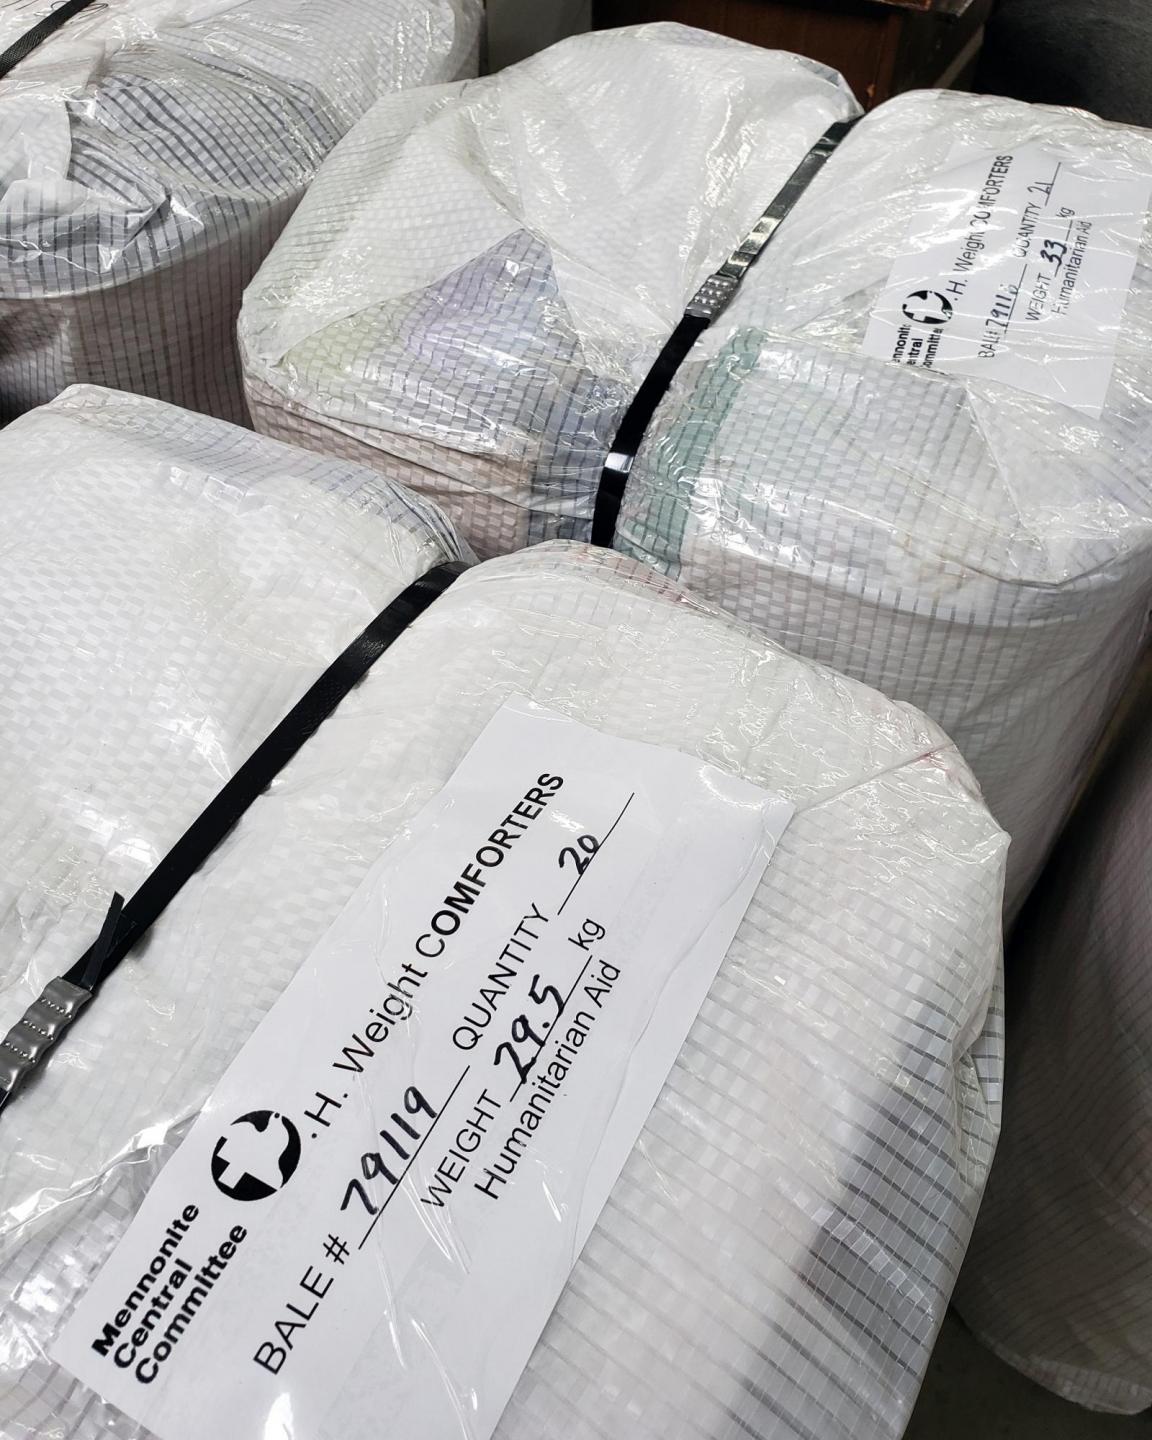 Bales wrapped in white plastic